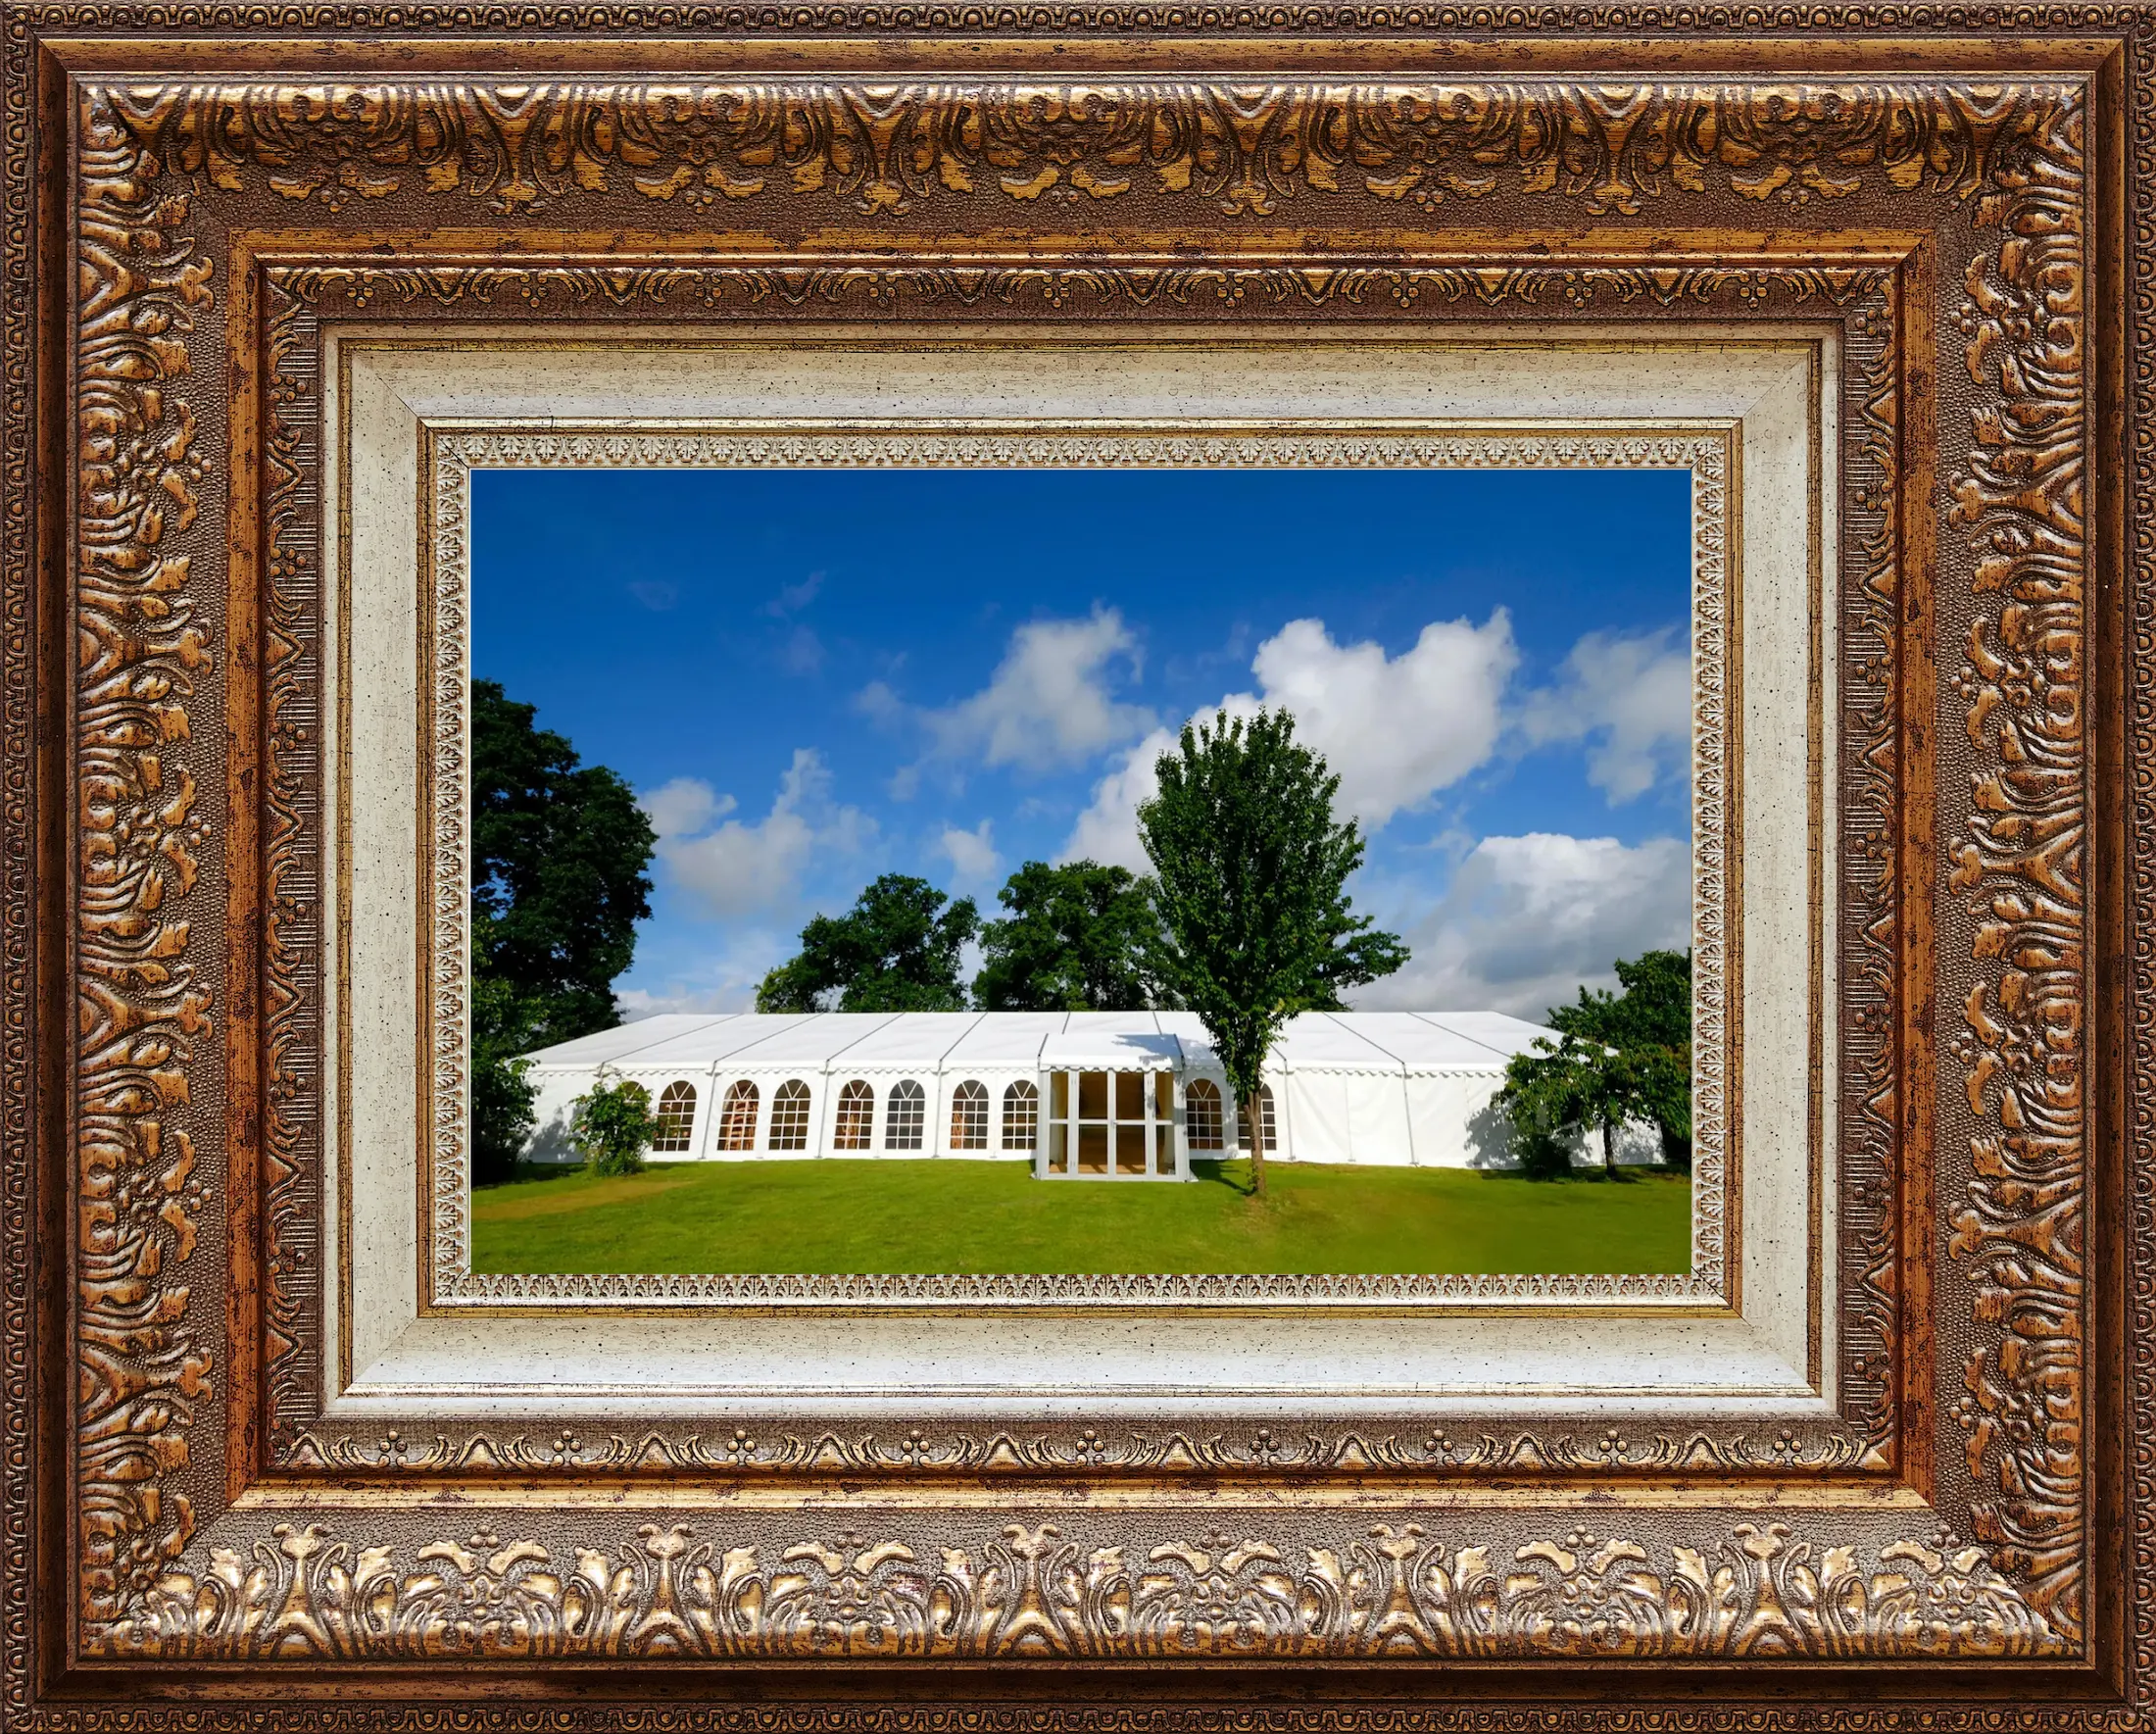 Picture of an elegent styled table and furnishing inside a marquee